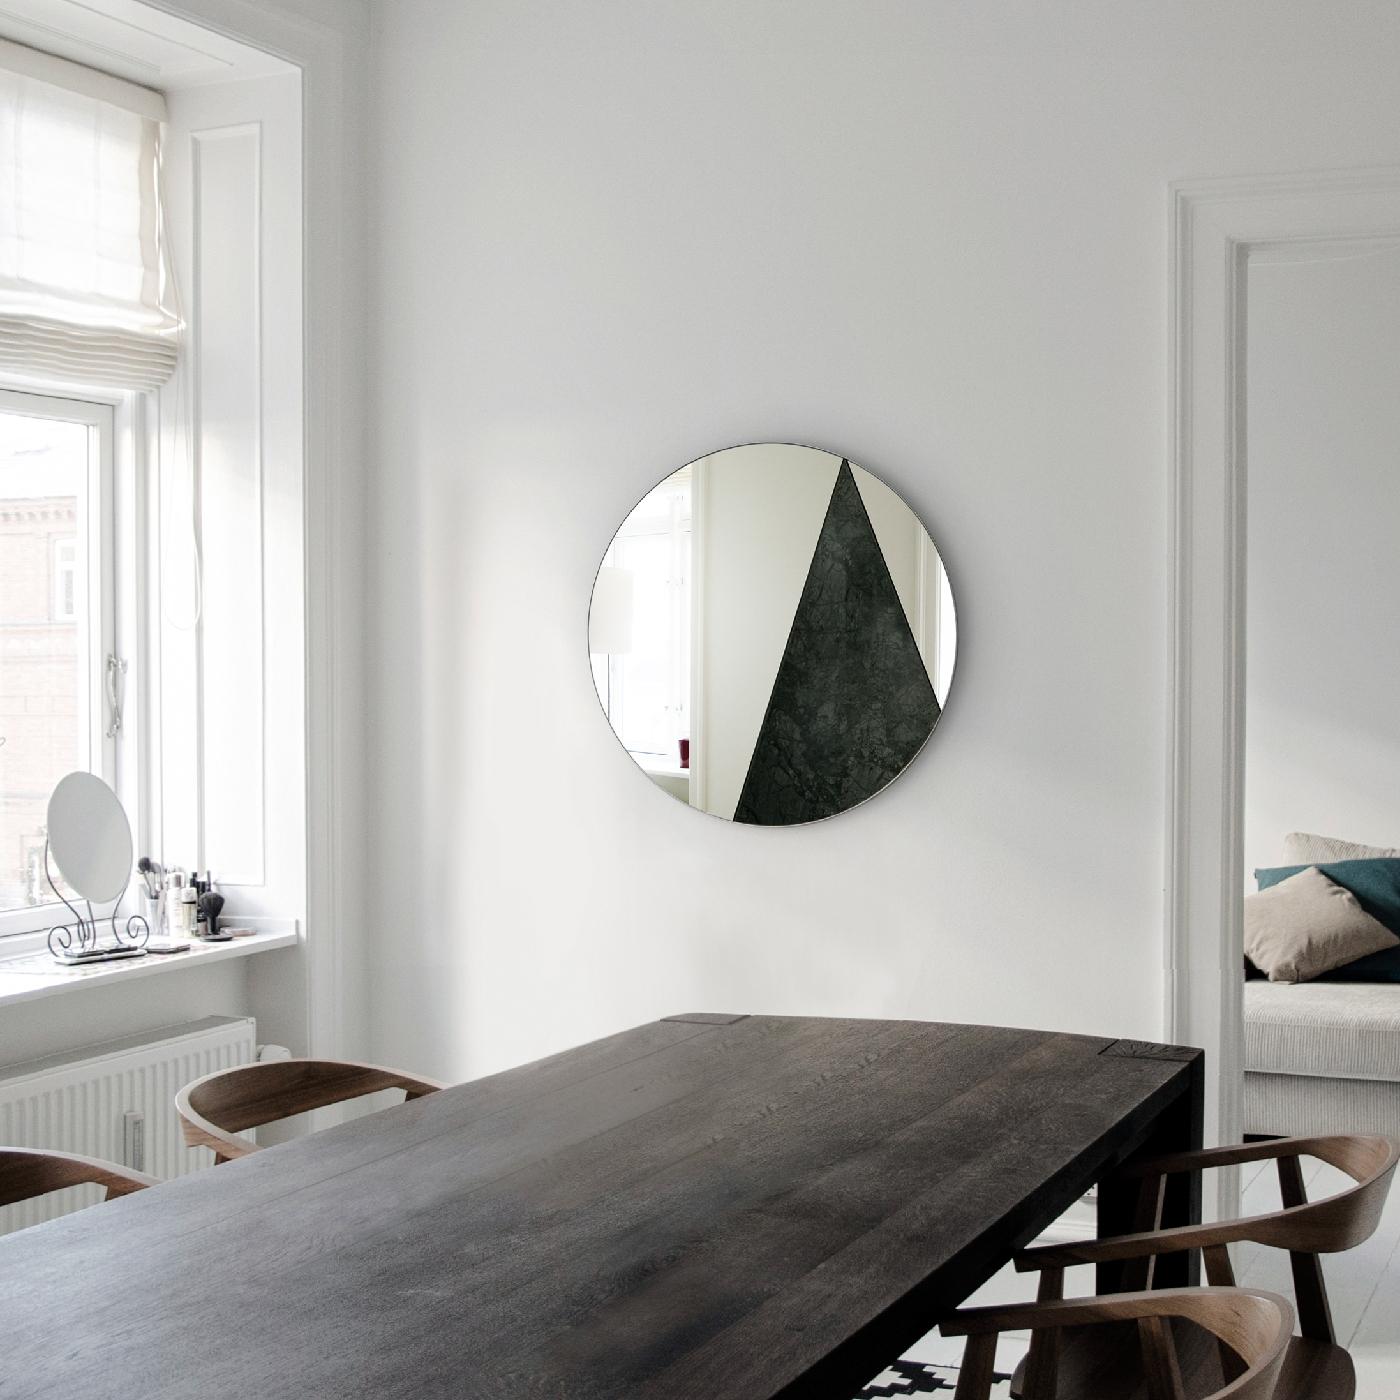 Merging traditional materials with a Minimalist design, the Res collection is a series of handmade mirrors of strong visual impact marked by an exquisite manufacturing quality. This mirror's round silhouette rests on a wooden base and comprises two